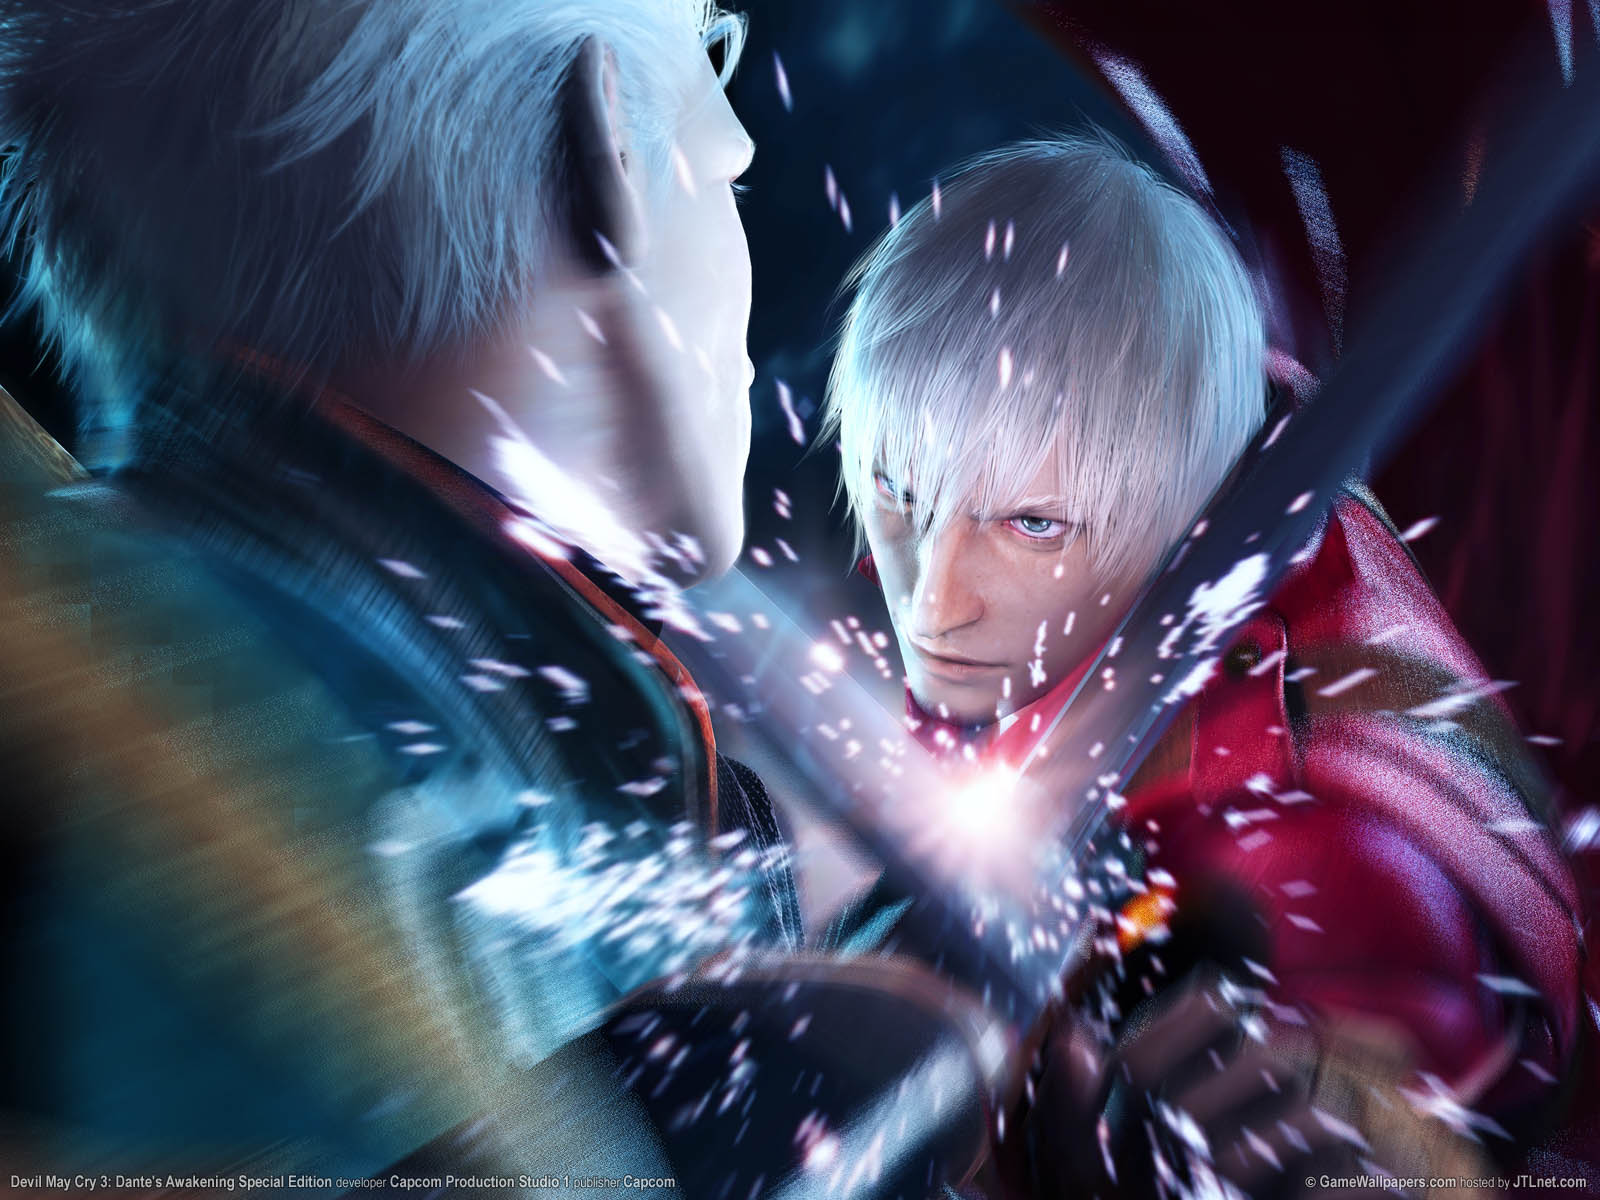 Devil May Cry 3%253A Dante%255C%2527s Awakening Special Edition fond d'cran 01 1600x1200